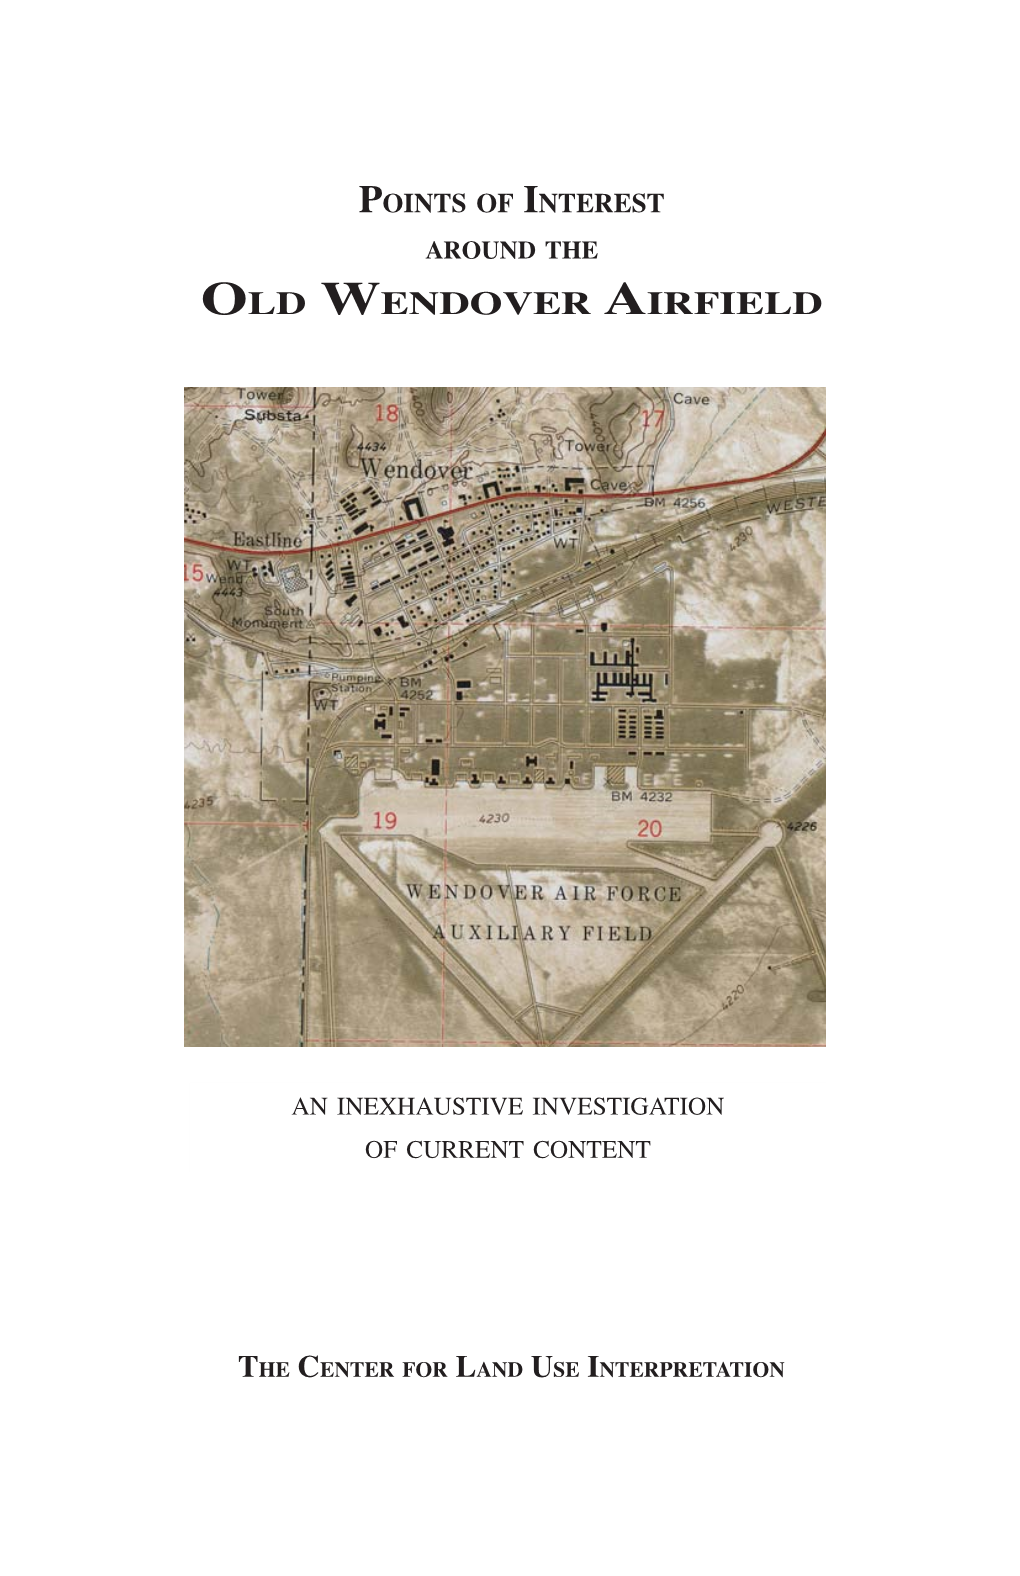 Old Wendover Airfield